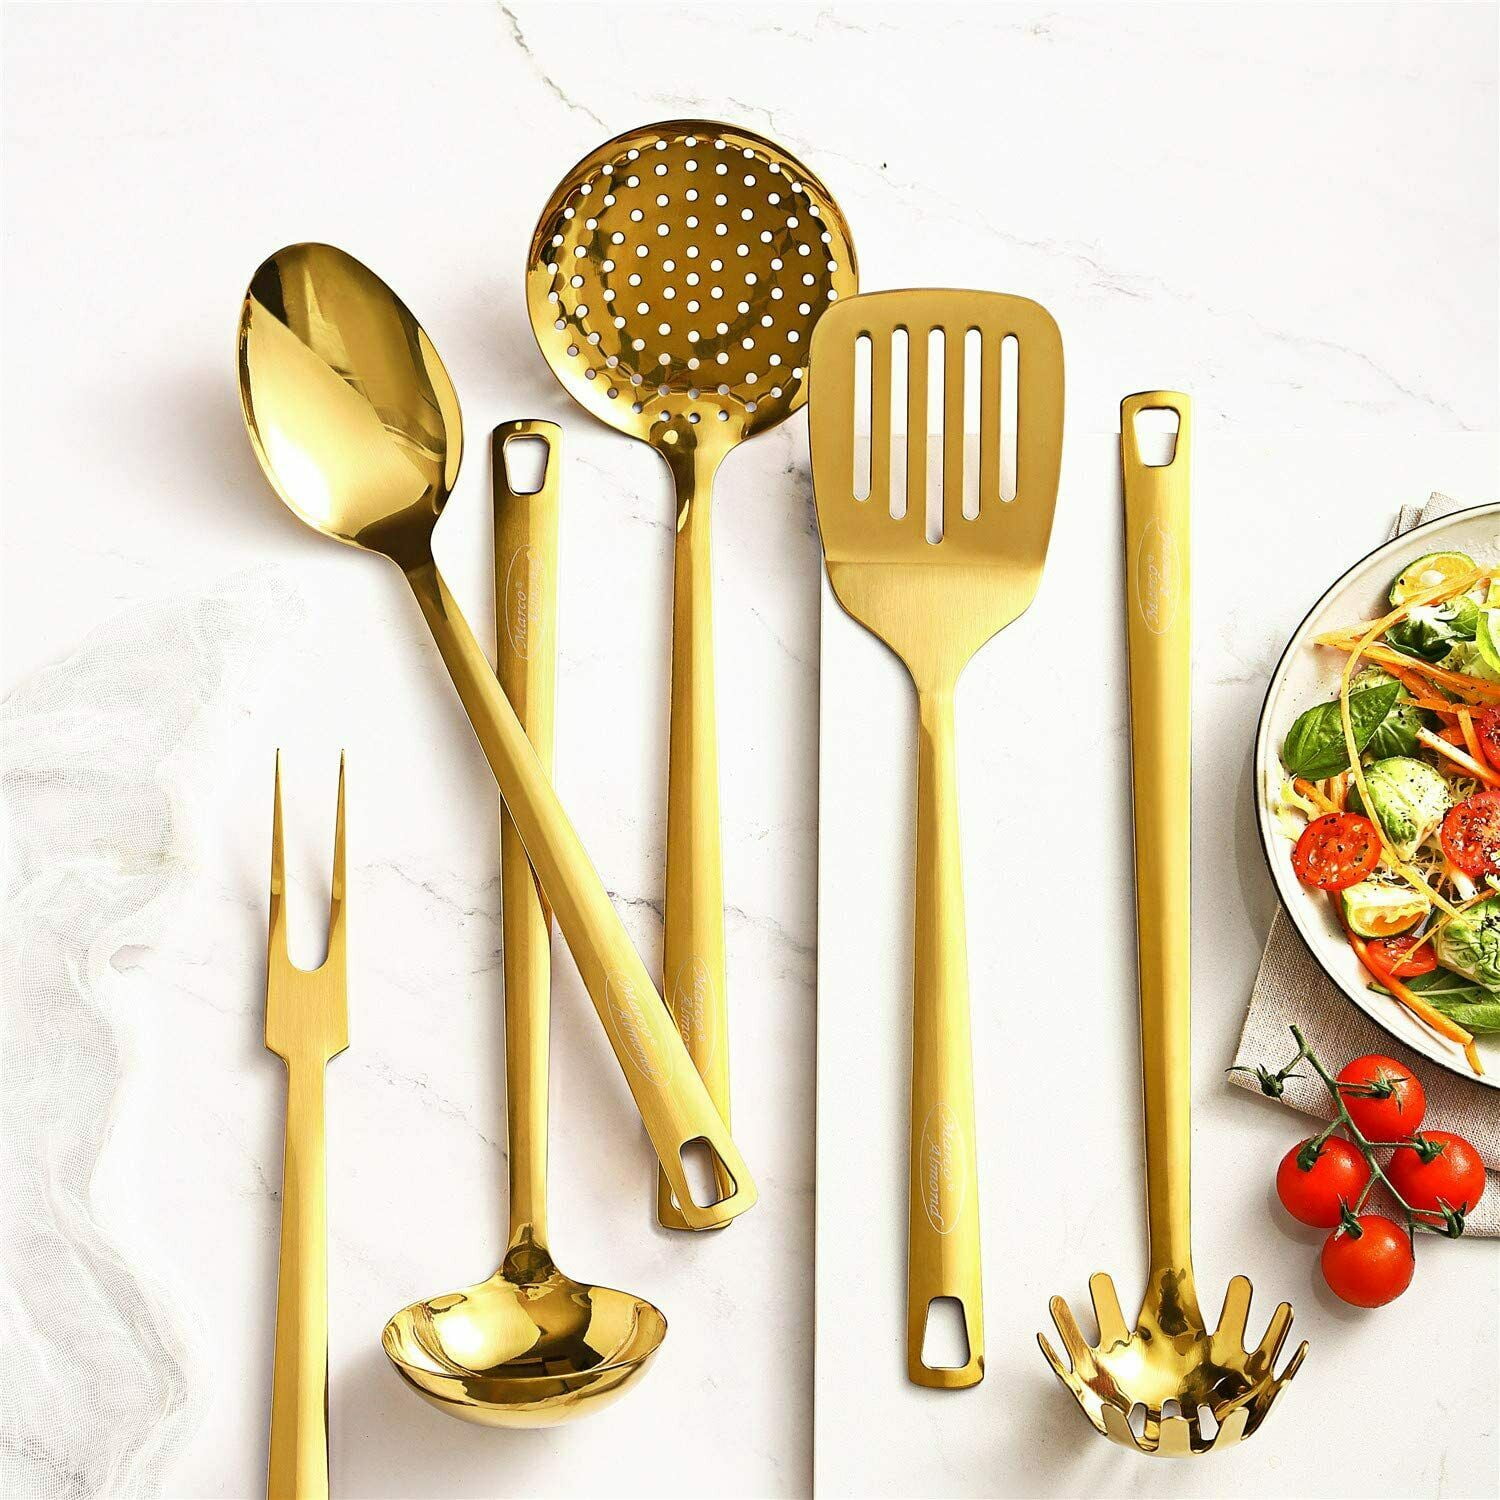 Marco Almond 7-Piece Gold Stainless Steel Cooking Utensil Set